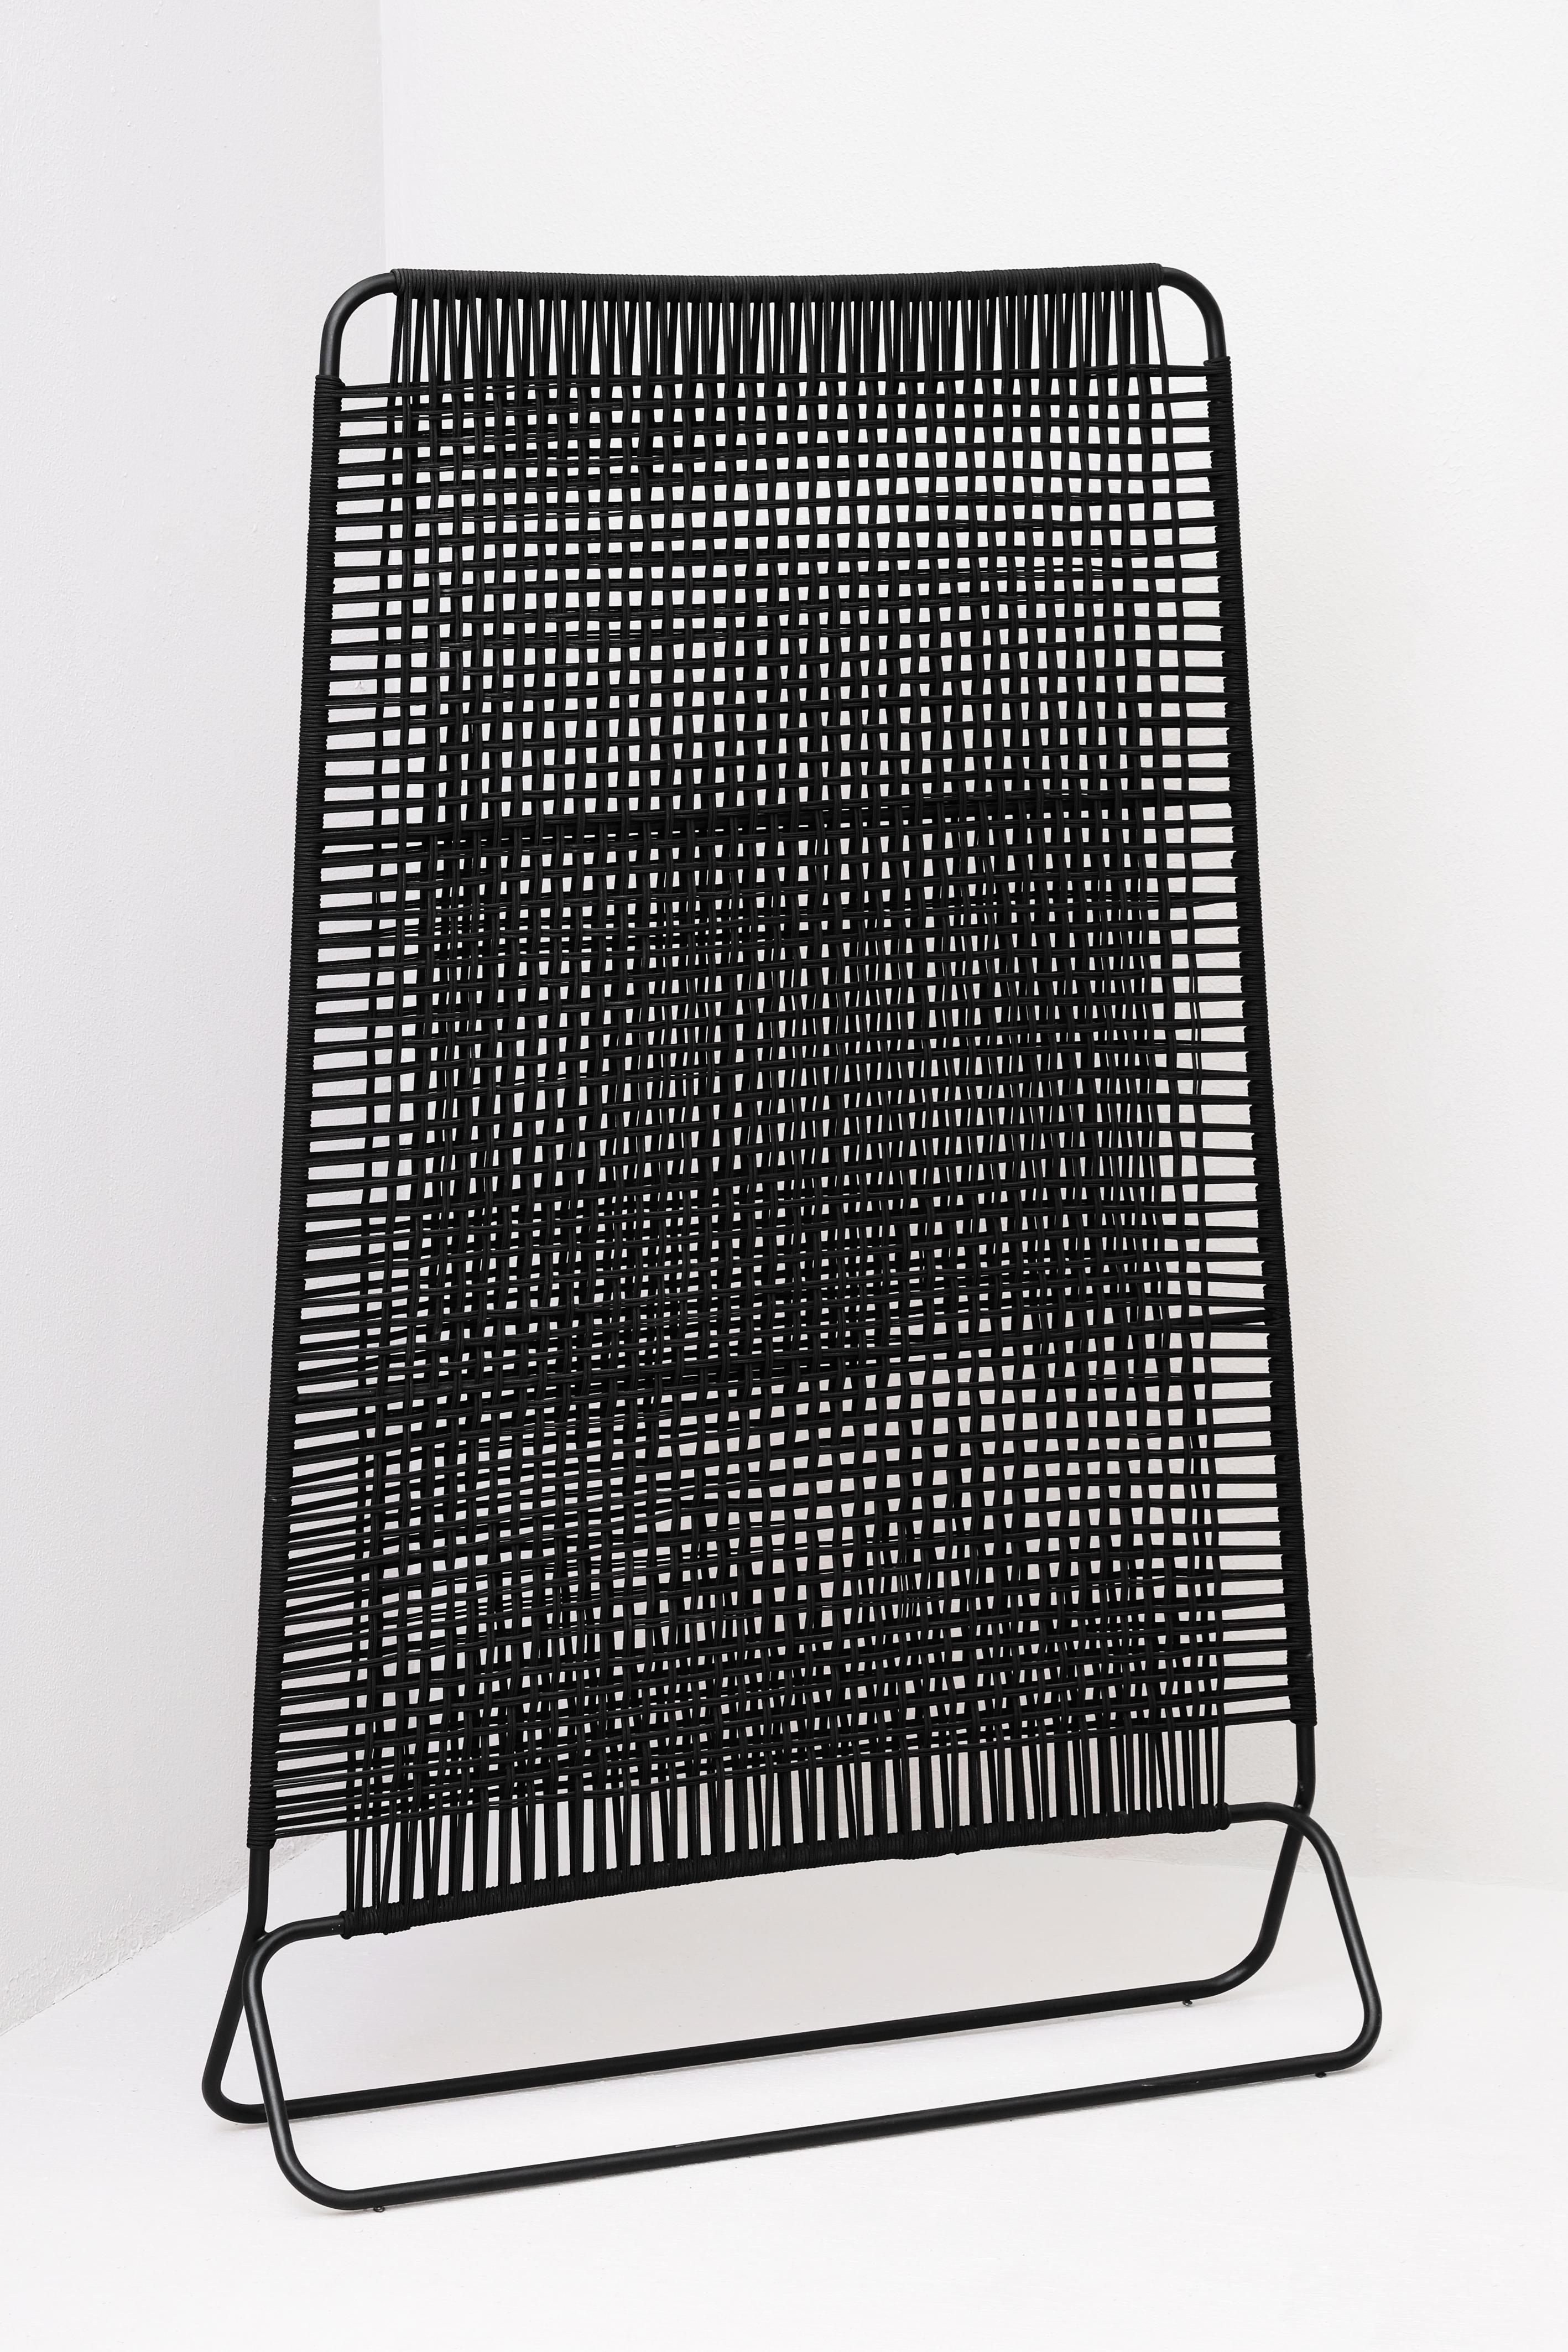 Penca Room Divider Small by Francisco Torres
Dimensions: D 30 x W 105 x H 180 cm
Materials: Steel.

The concept of the Penca family, designed by Francisco Torres and Rosa Hanhausen, is inspired by the geographical context of Mexico, in the diversity